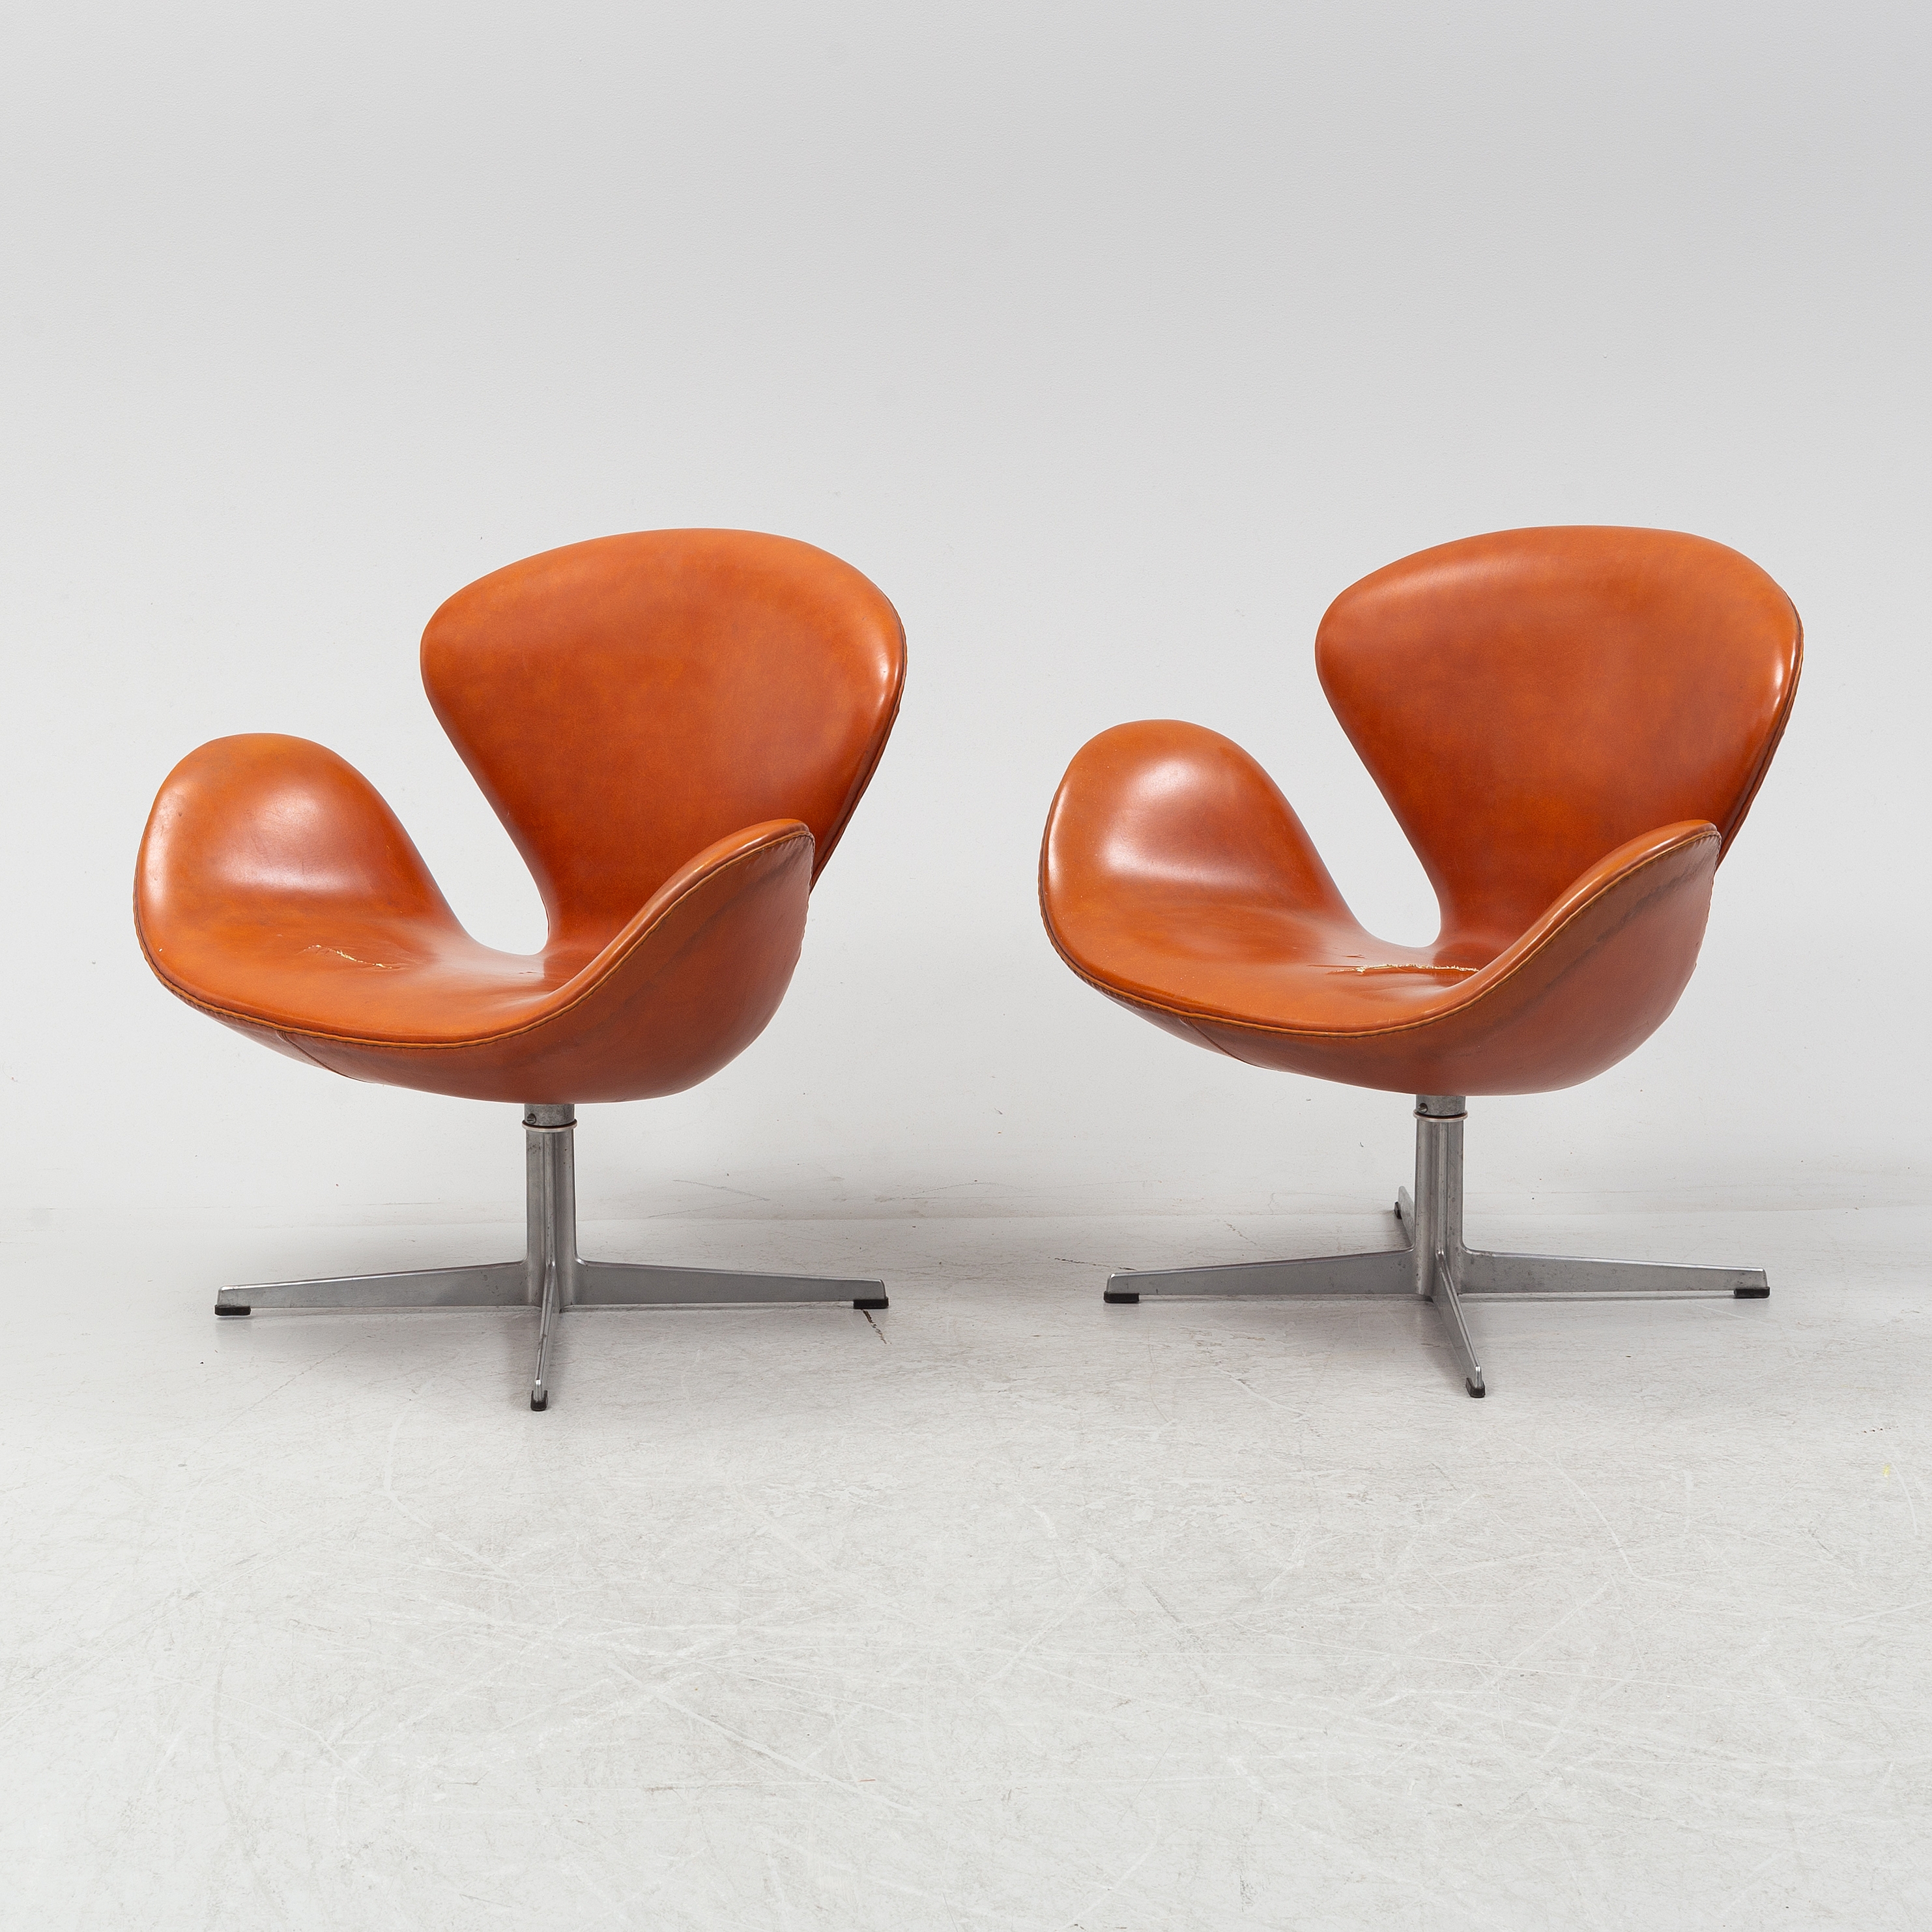 a pair of 'Swan' lounge chairs from Fritz Hansen, Denmark 1968 by Arne Jacobsen, 1968